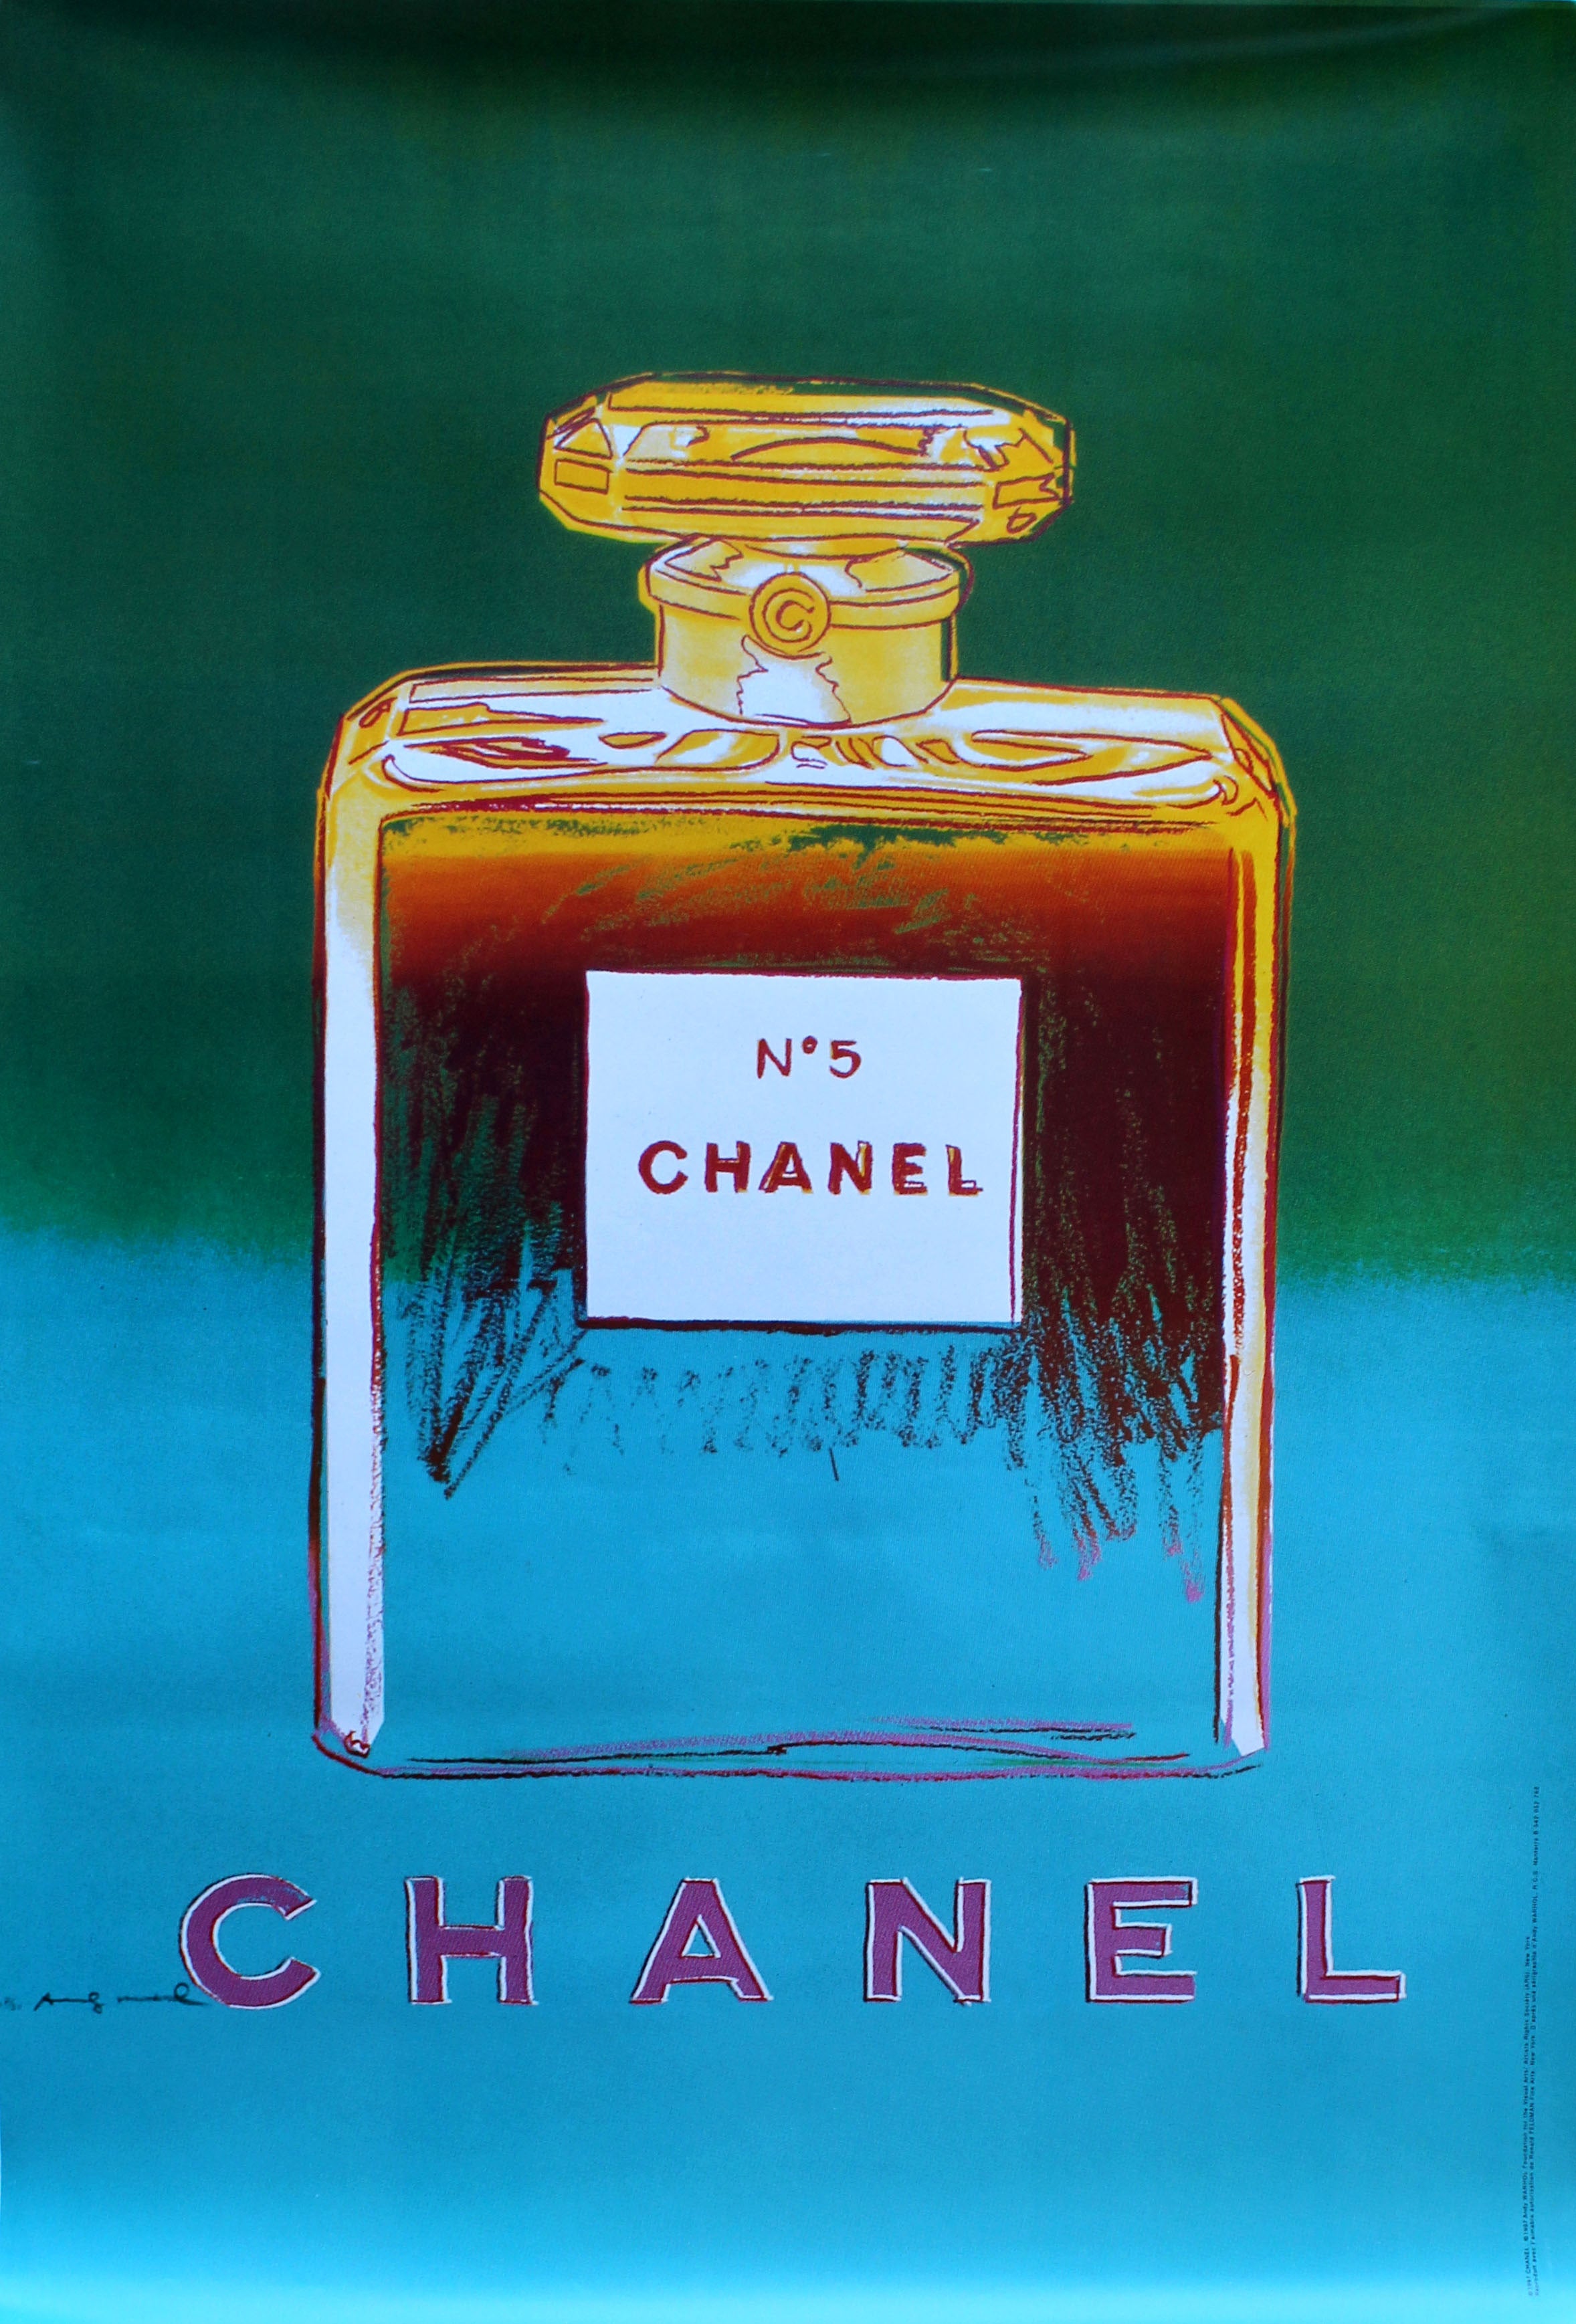 Andy Warhol Chanel No 5 - 4 For Sale on 1stDibs